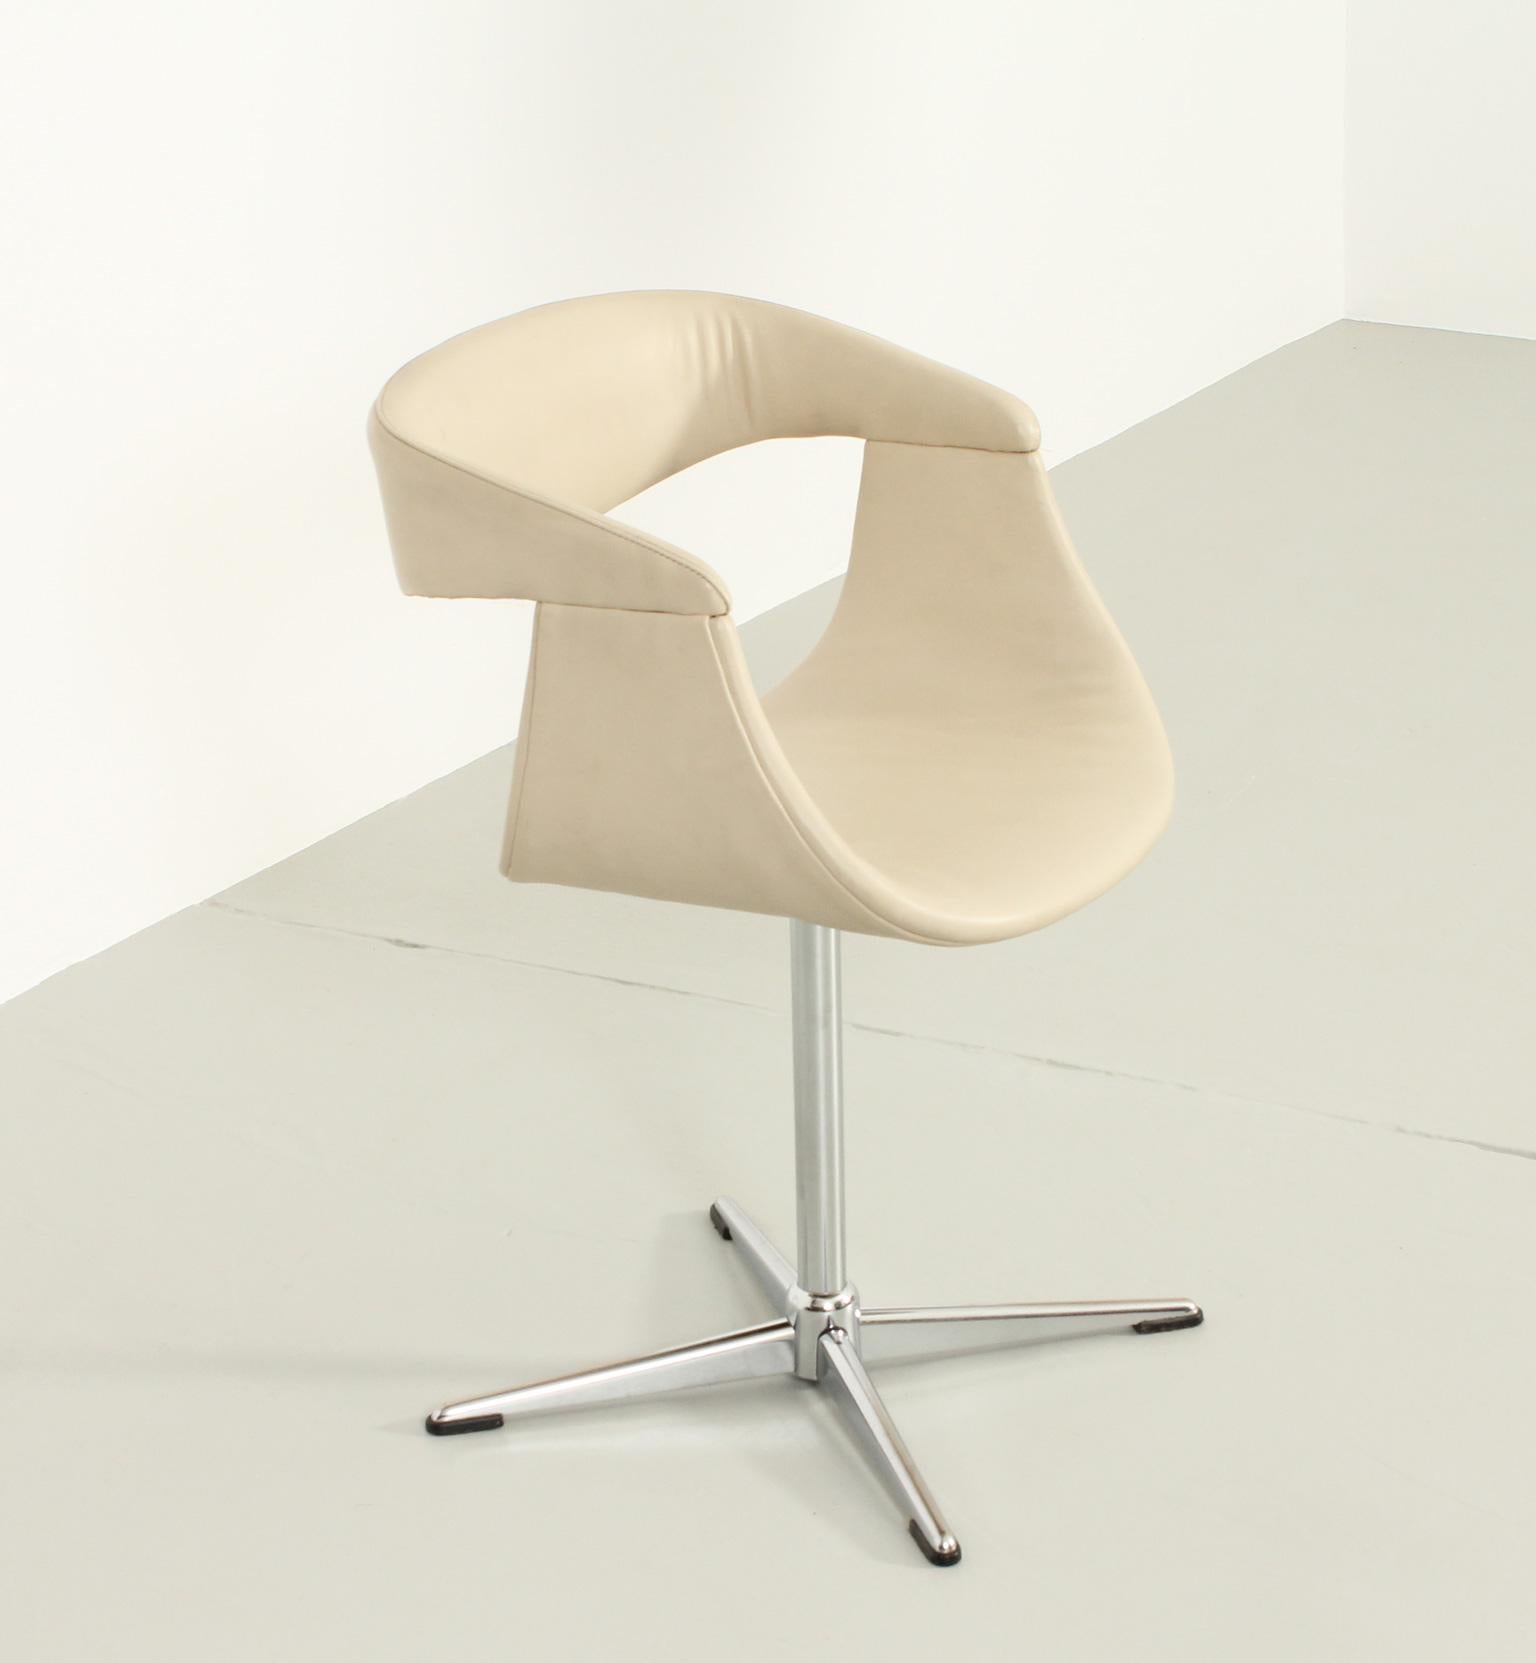 Mid-20th Century Office Swivel Chair in Cream Leather, France, 1960's For Sale